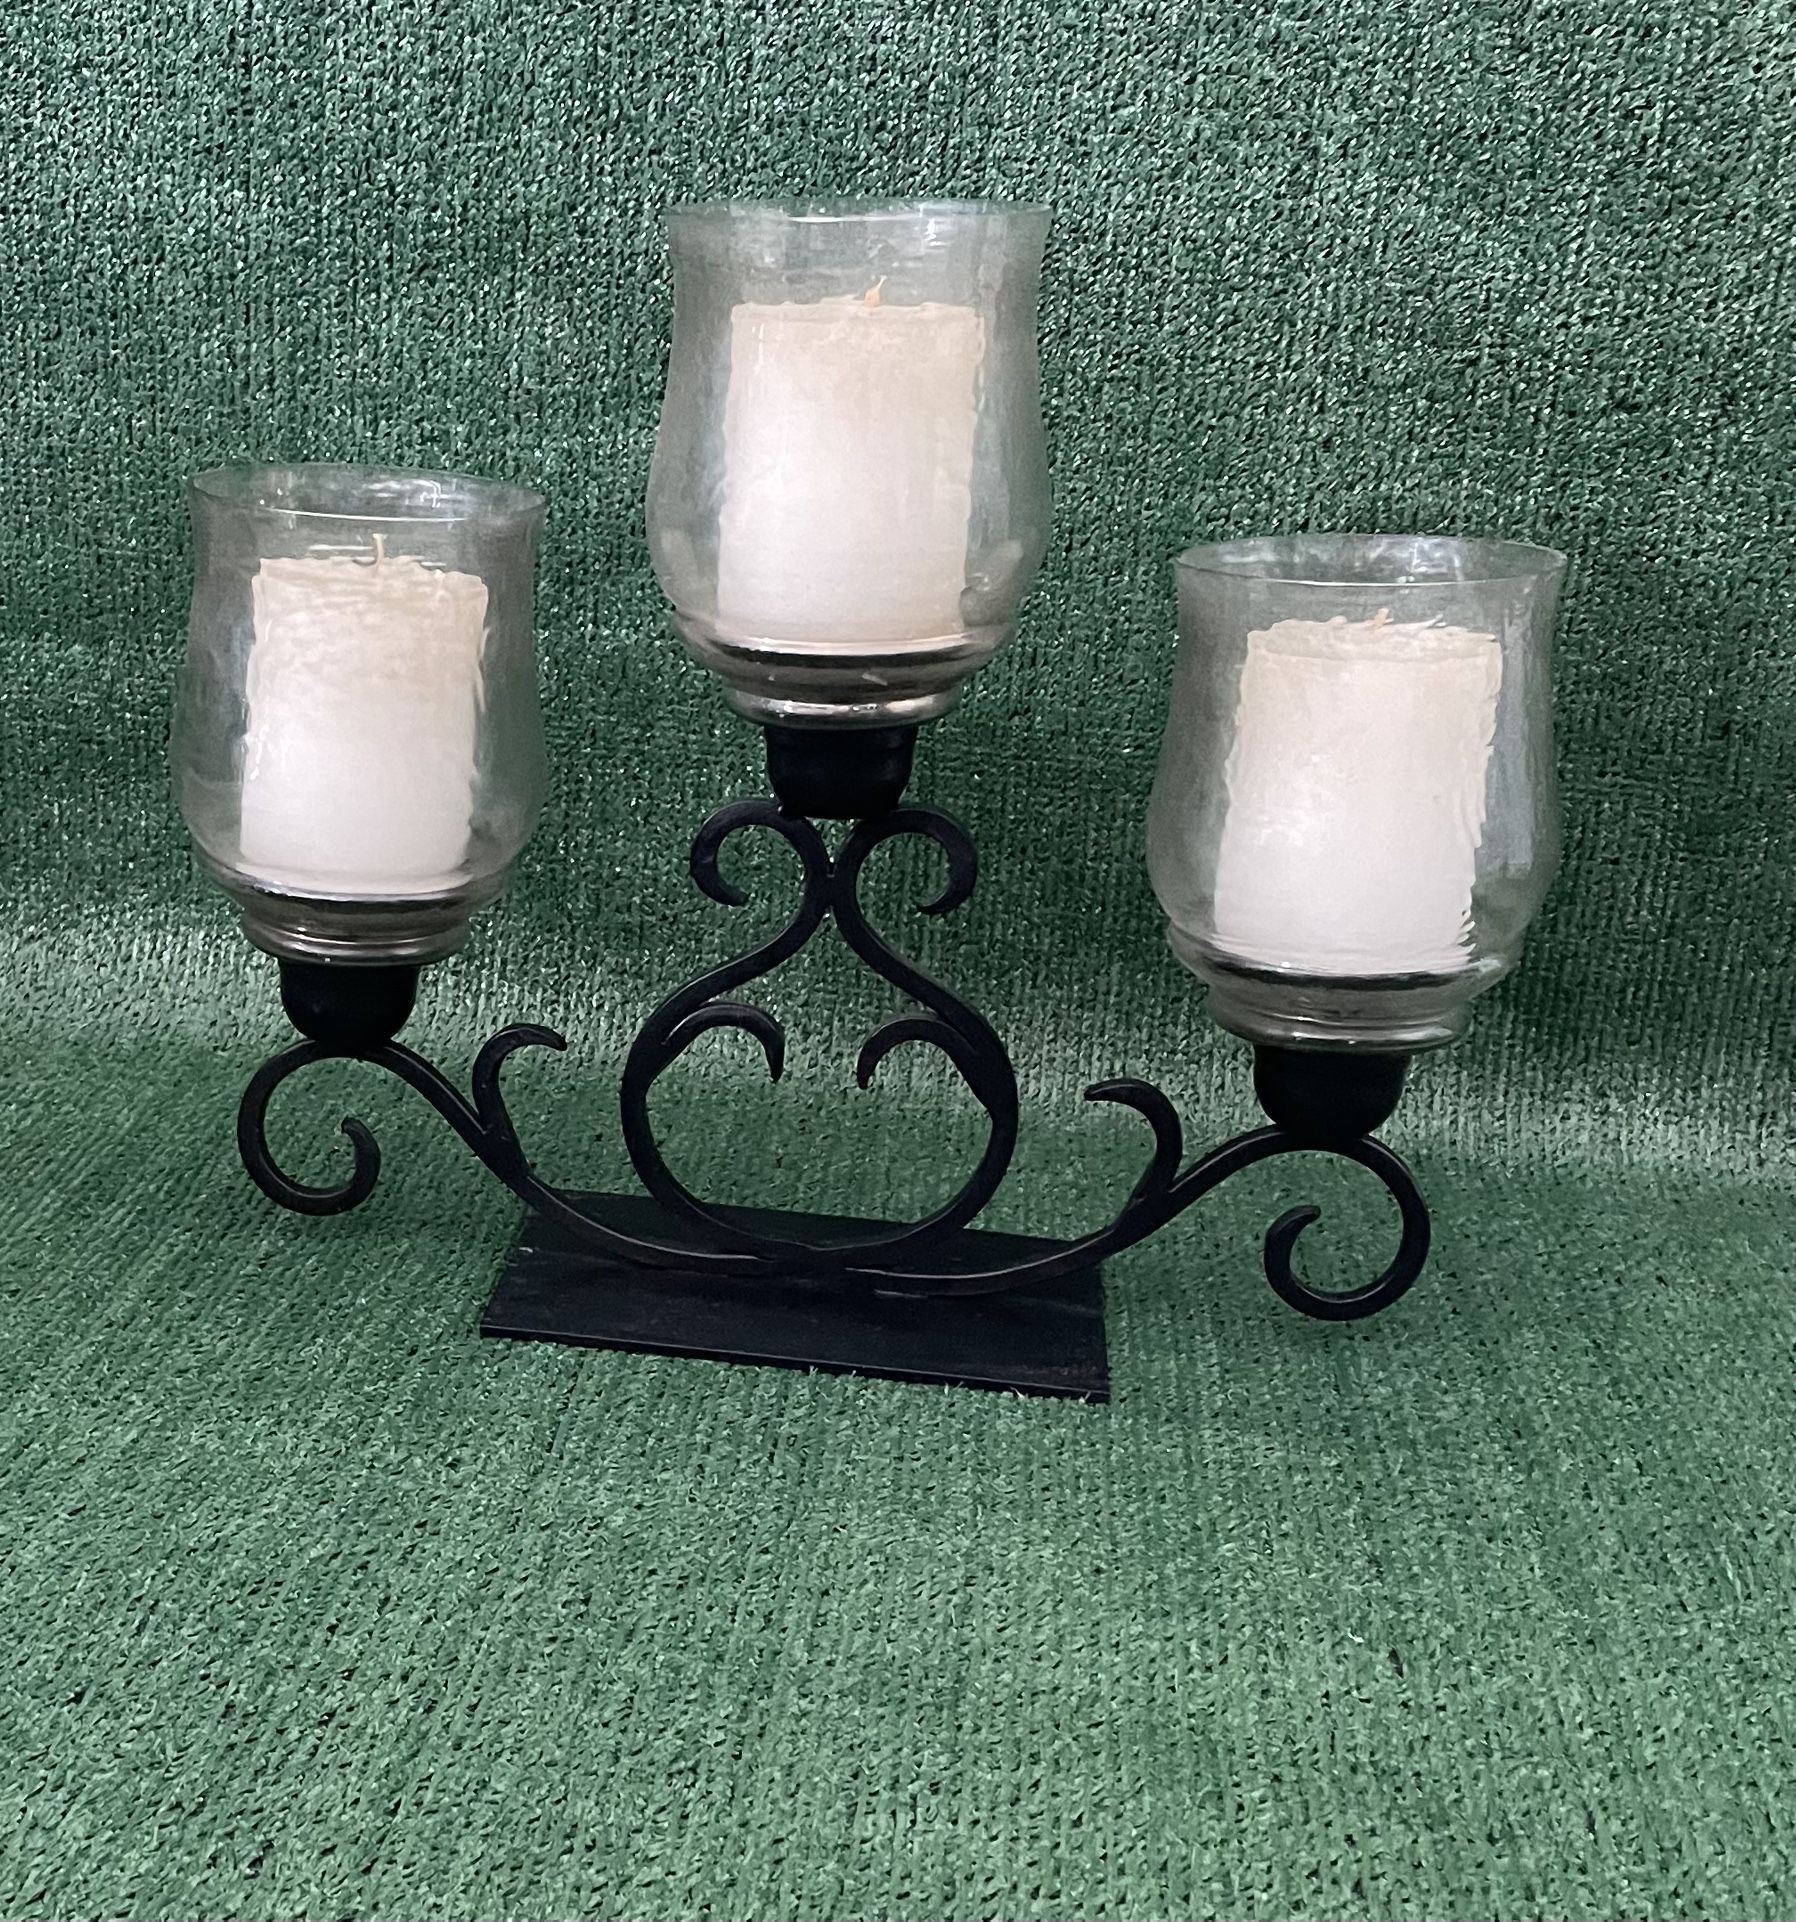 3 Candle Holder